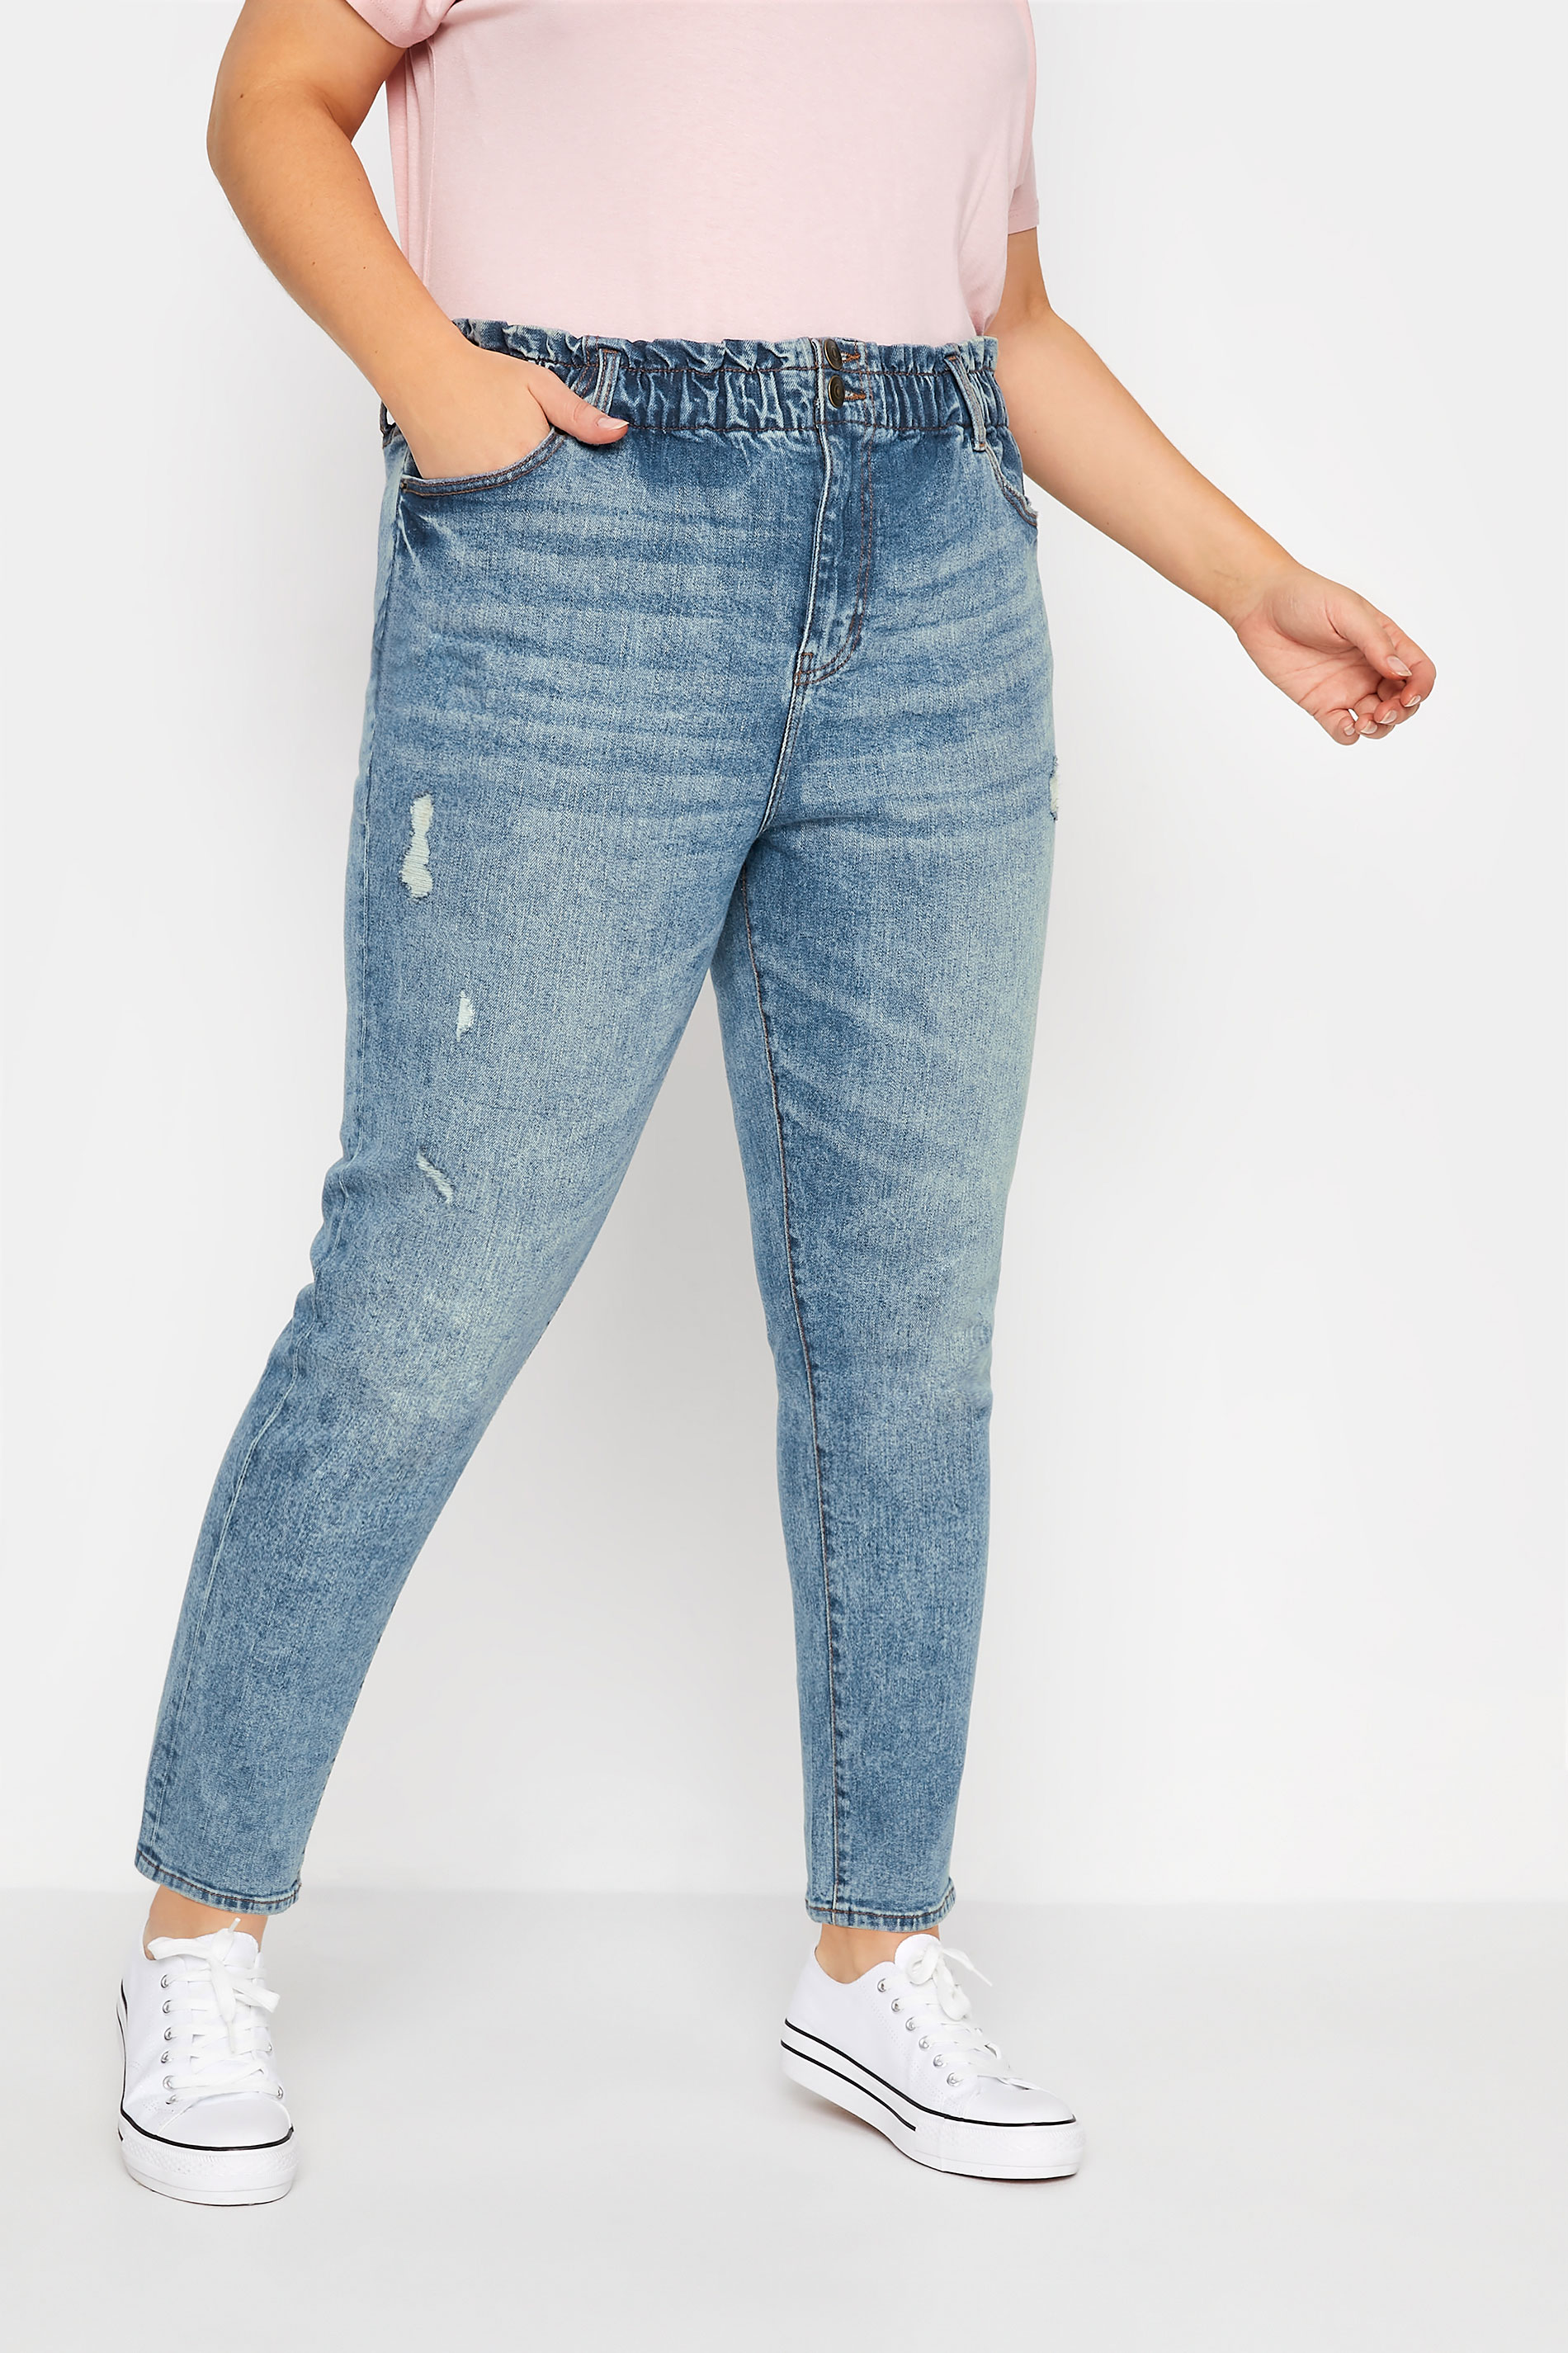 INSIDELEG 38 COMFORT FIT EXTRA TALL STONE WASHED BLUE JEANS IN WAIST 32 TO 50" 